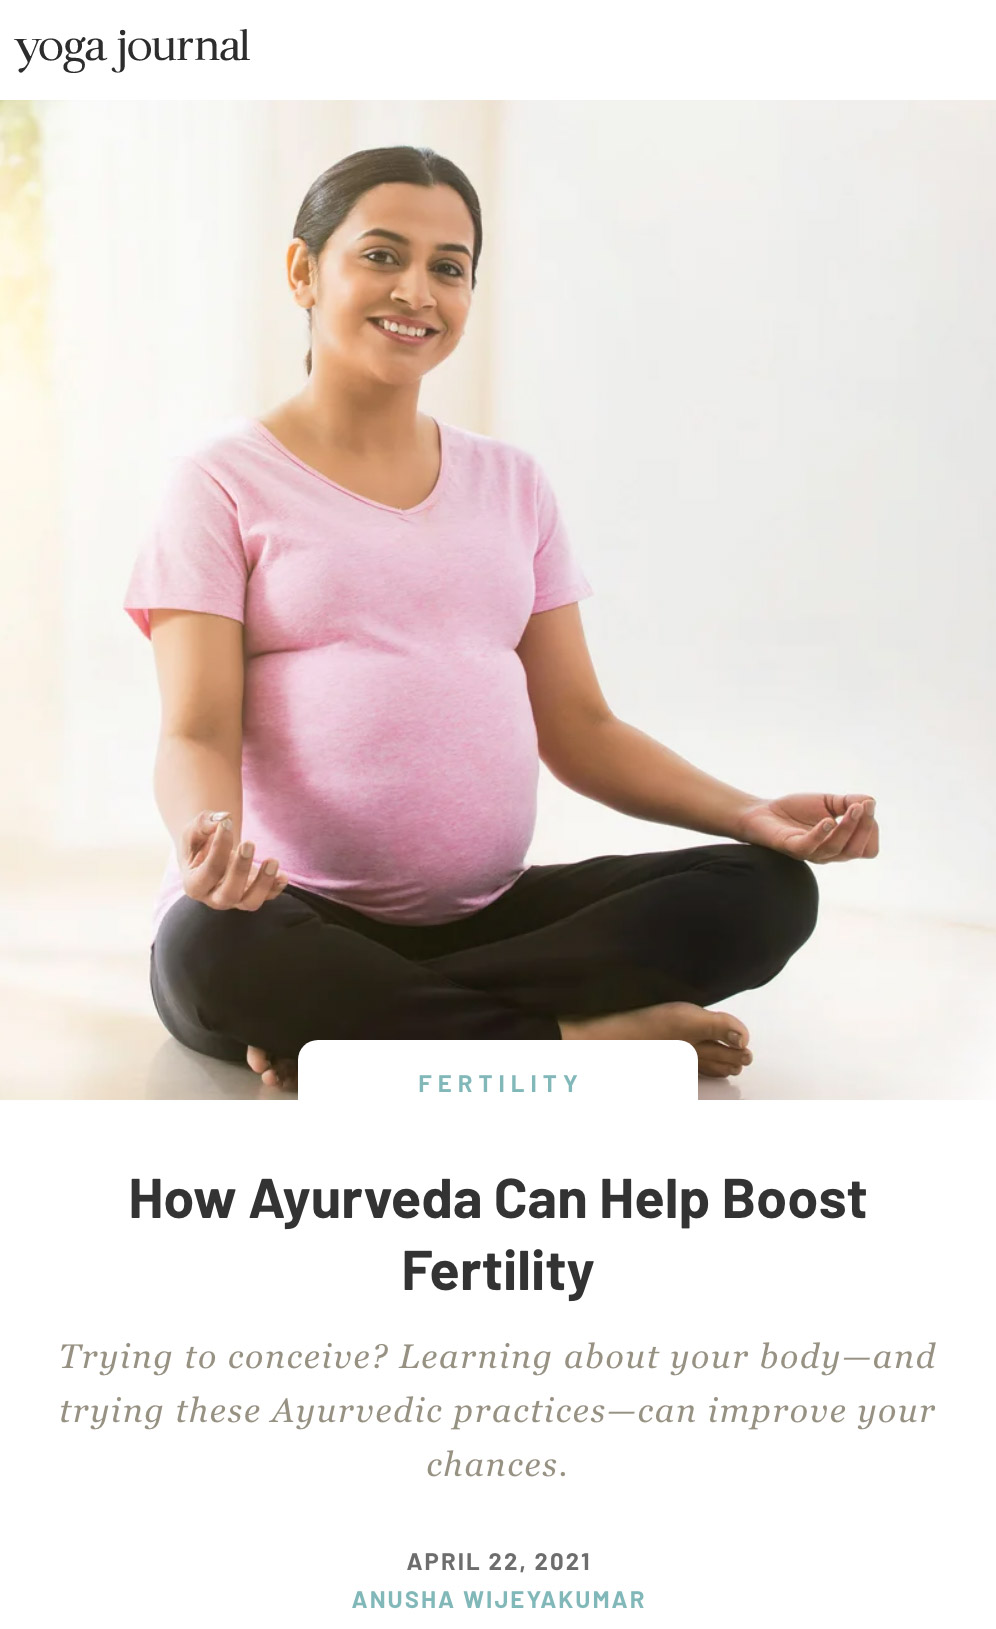 How Ayurveda Can Help Boost Fertility